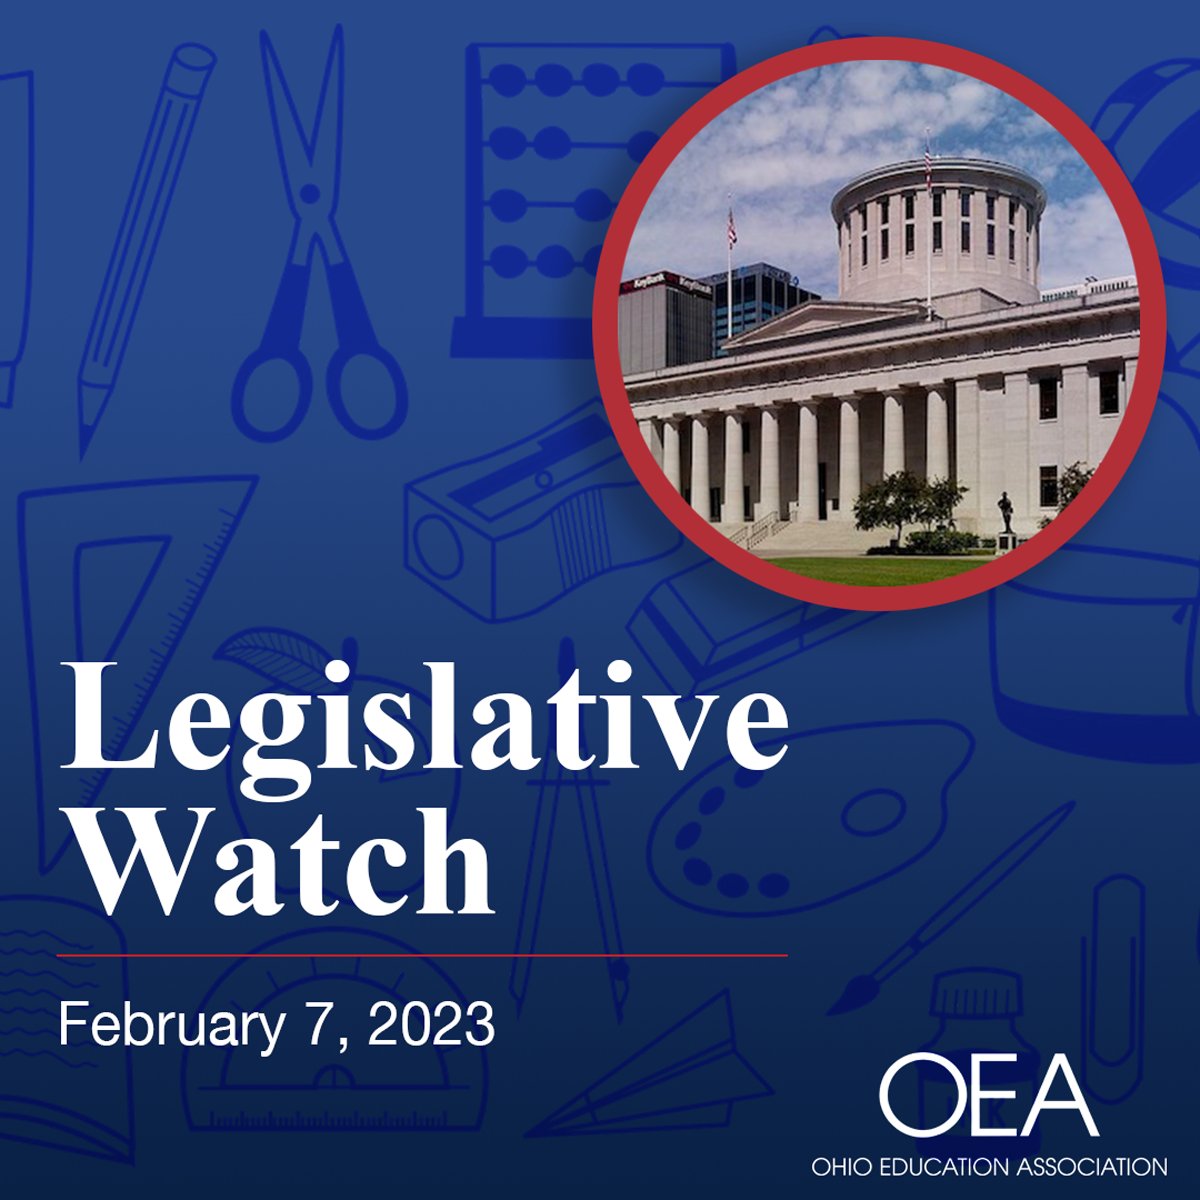 The newest #LegislativeWatch is out! 👀 Covering public education issues at the #ohiostatehouse, including a review of portions of @GovMikeDeWine's Executive Budget Proposal 💰 

Budget Edition 1️⃣ 
ohea.org/legislative-wa…

Budget Edition 2️⃣ 
ohea.org/legislative-wa…